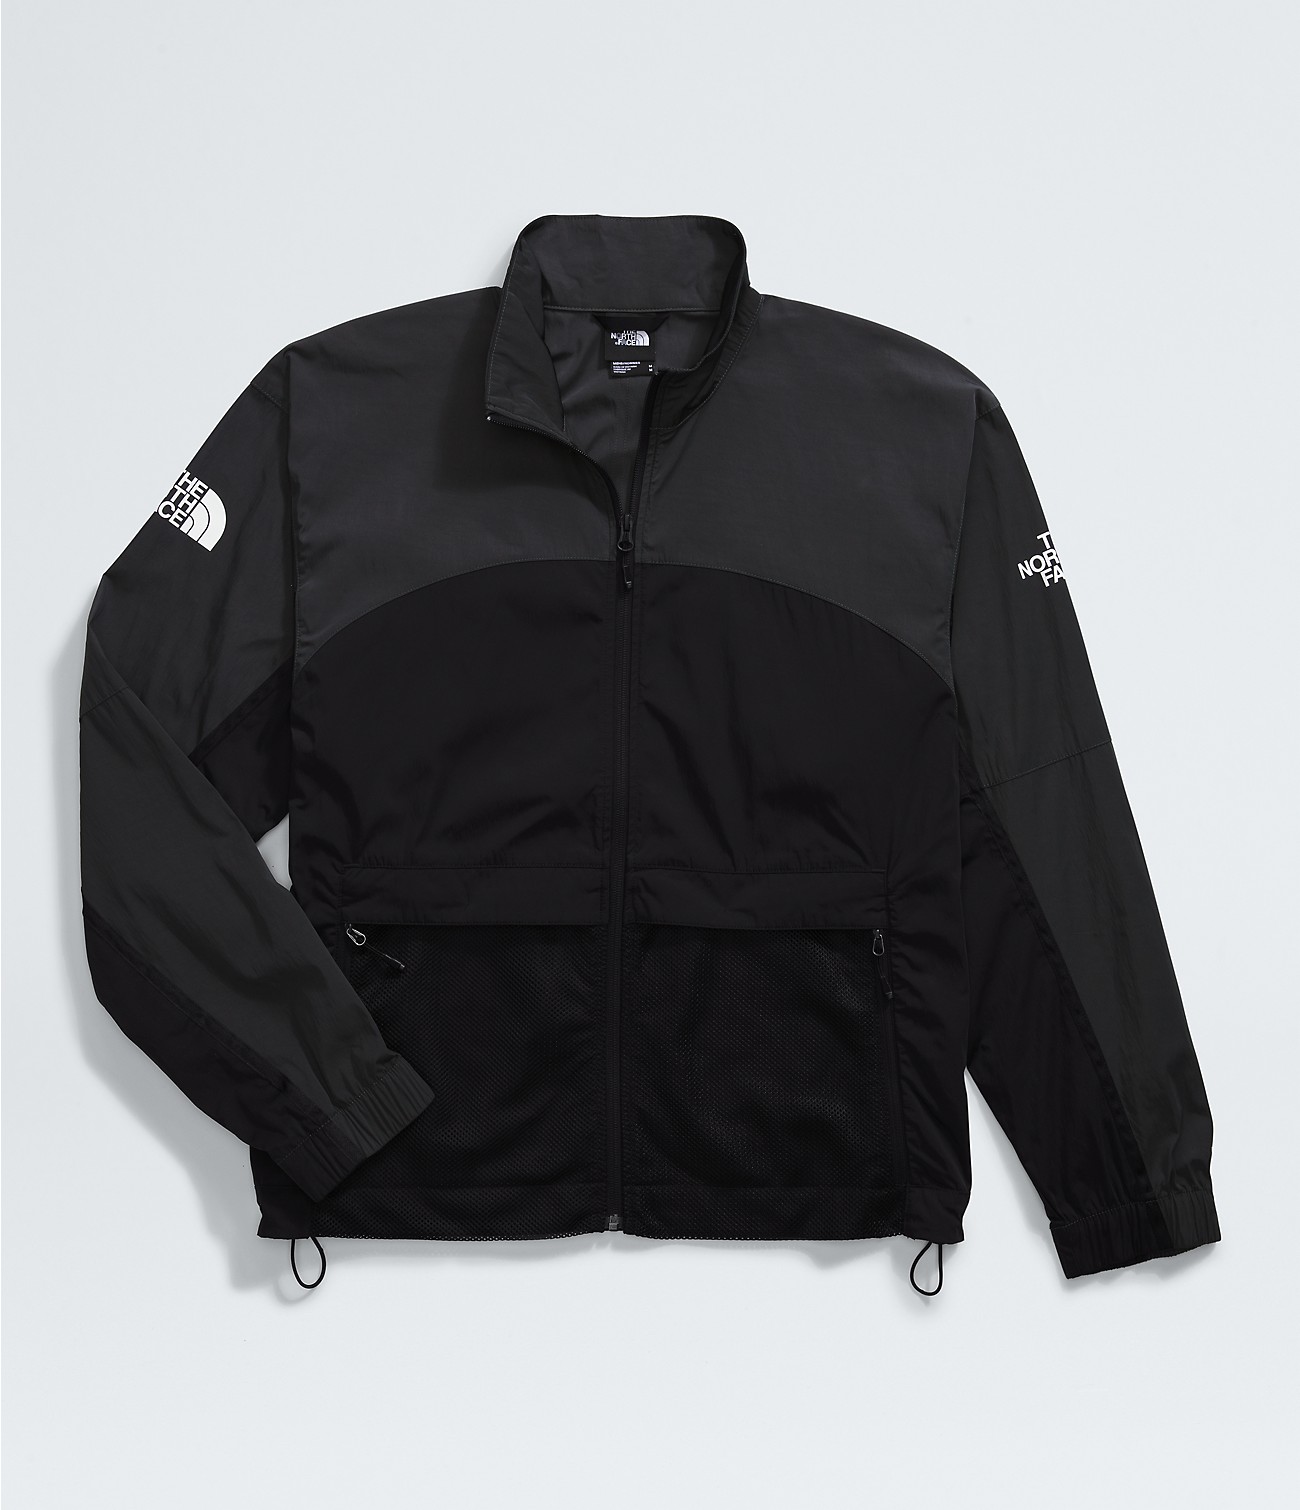 Men’s 2000 Mountain Light Wind Jacket | The North Face